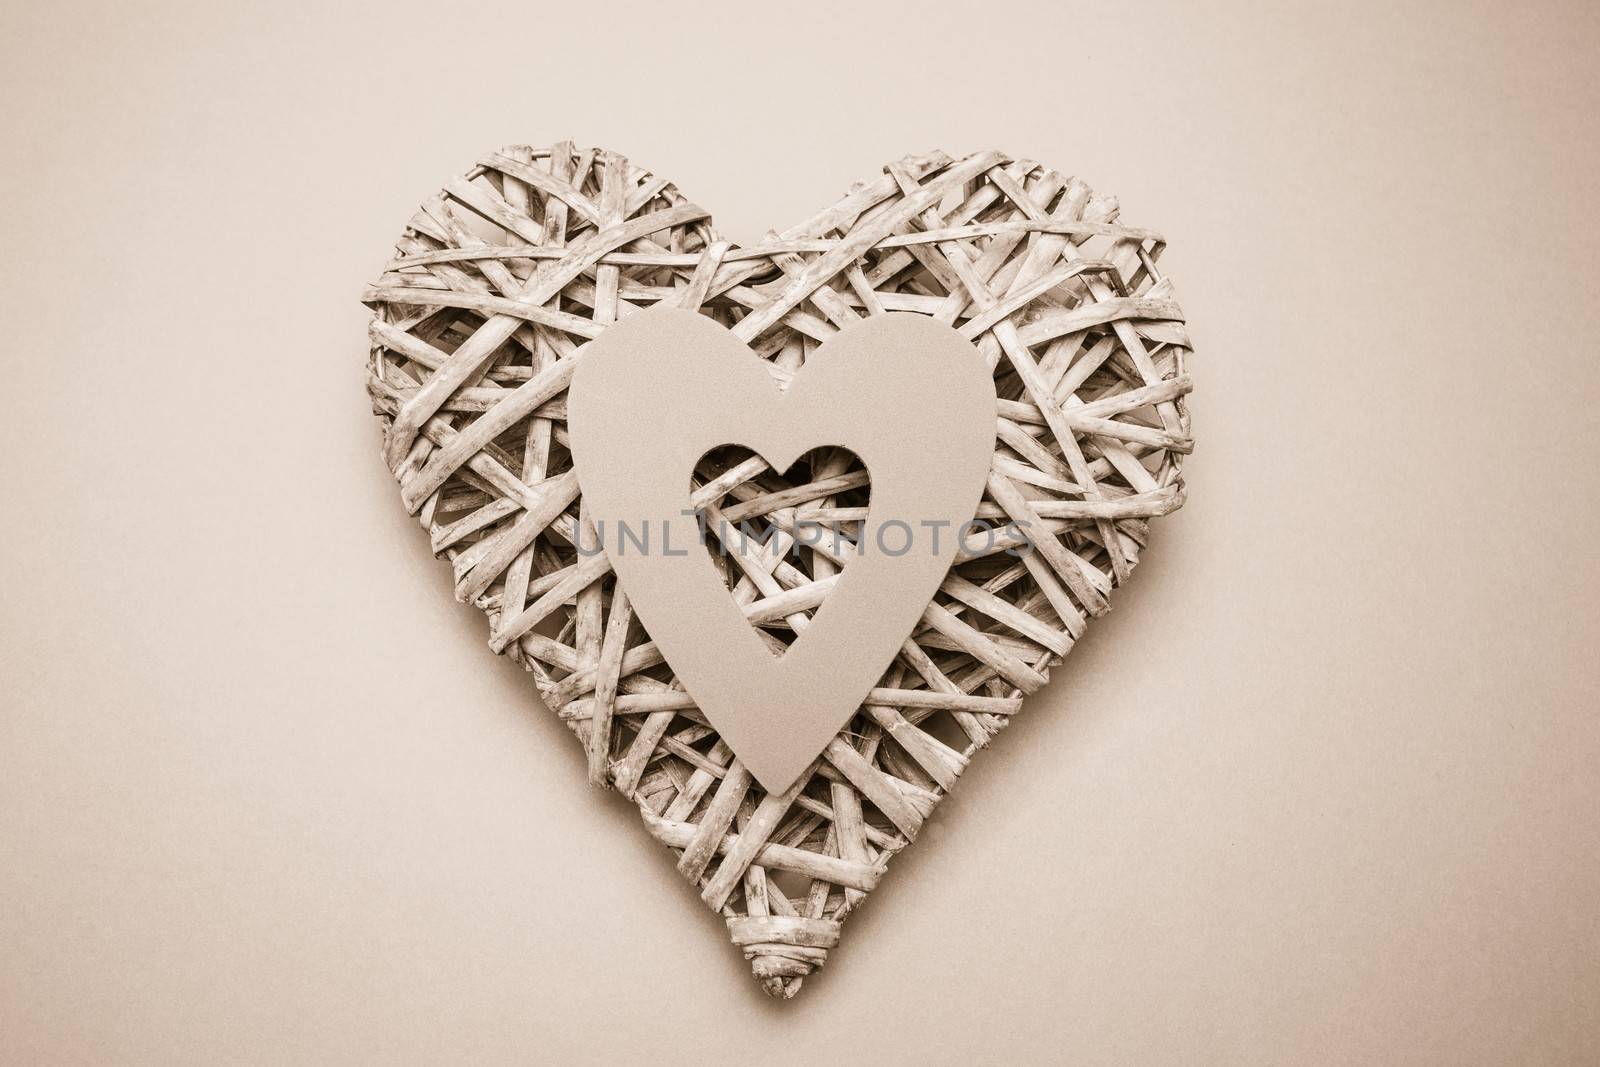 Wicker heart ornament with paper cut out on grey background